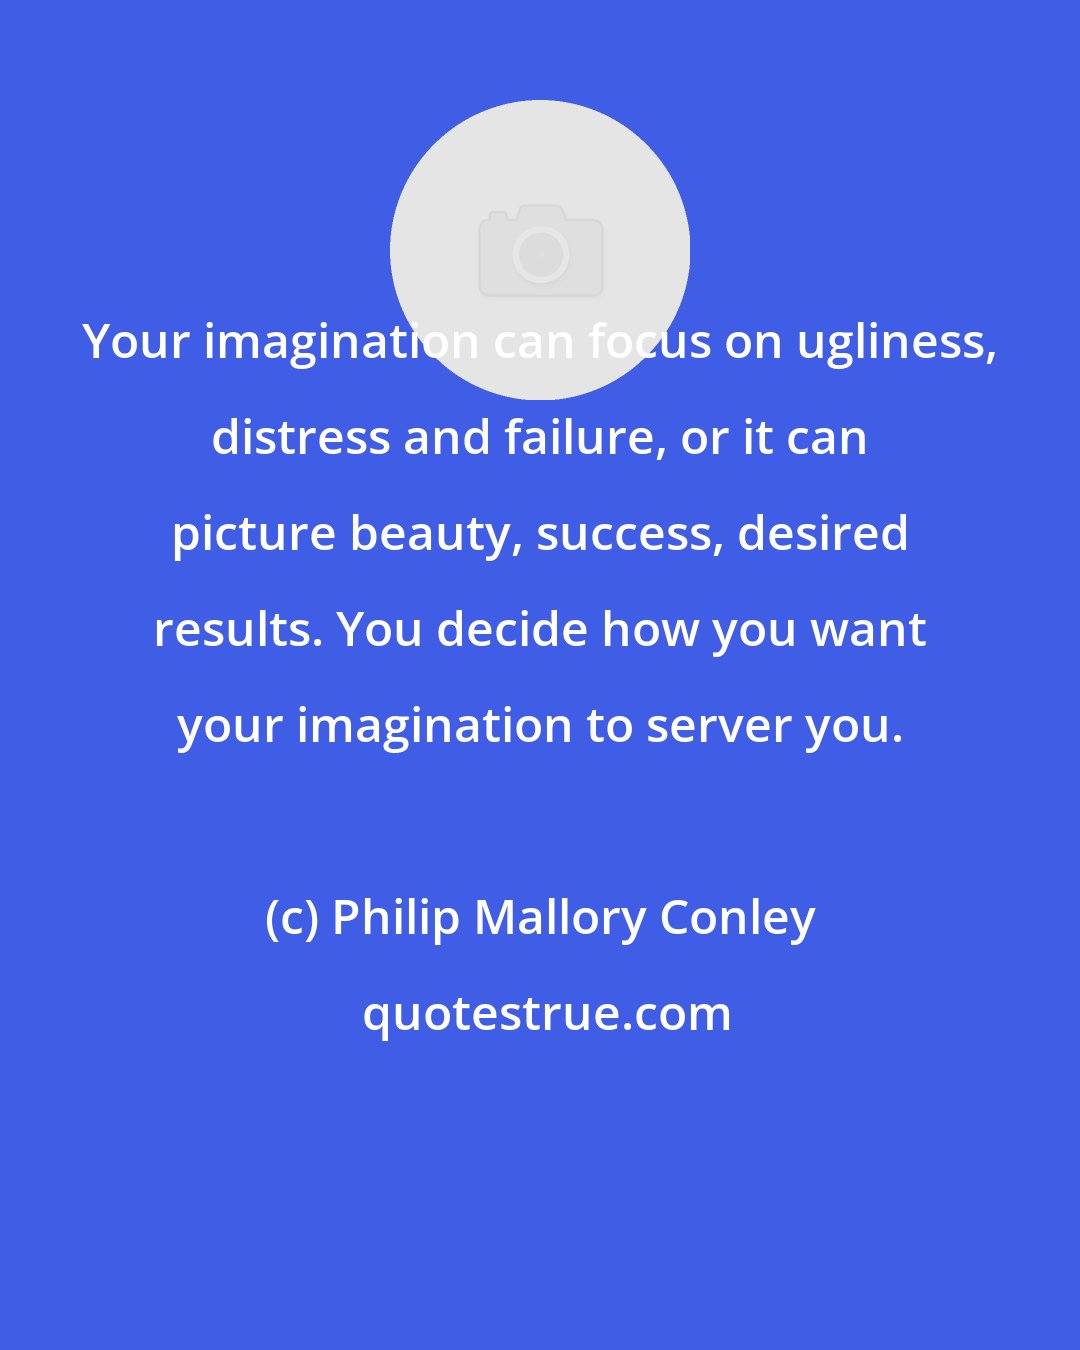 Philip Mallory Conley: Your imagination can focus on ugliness, distress and failure, or it can picture beauty, success, desired results. You decide how you want your imagination to server you.